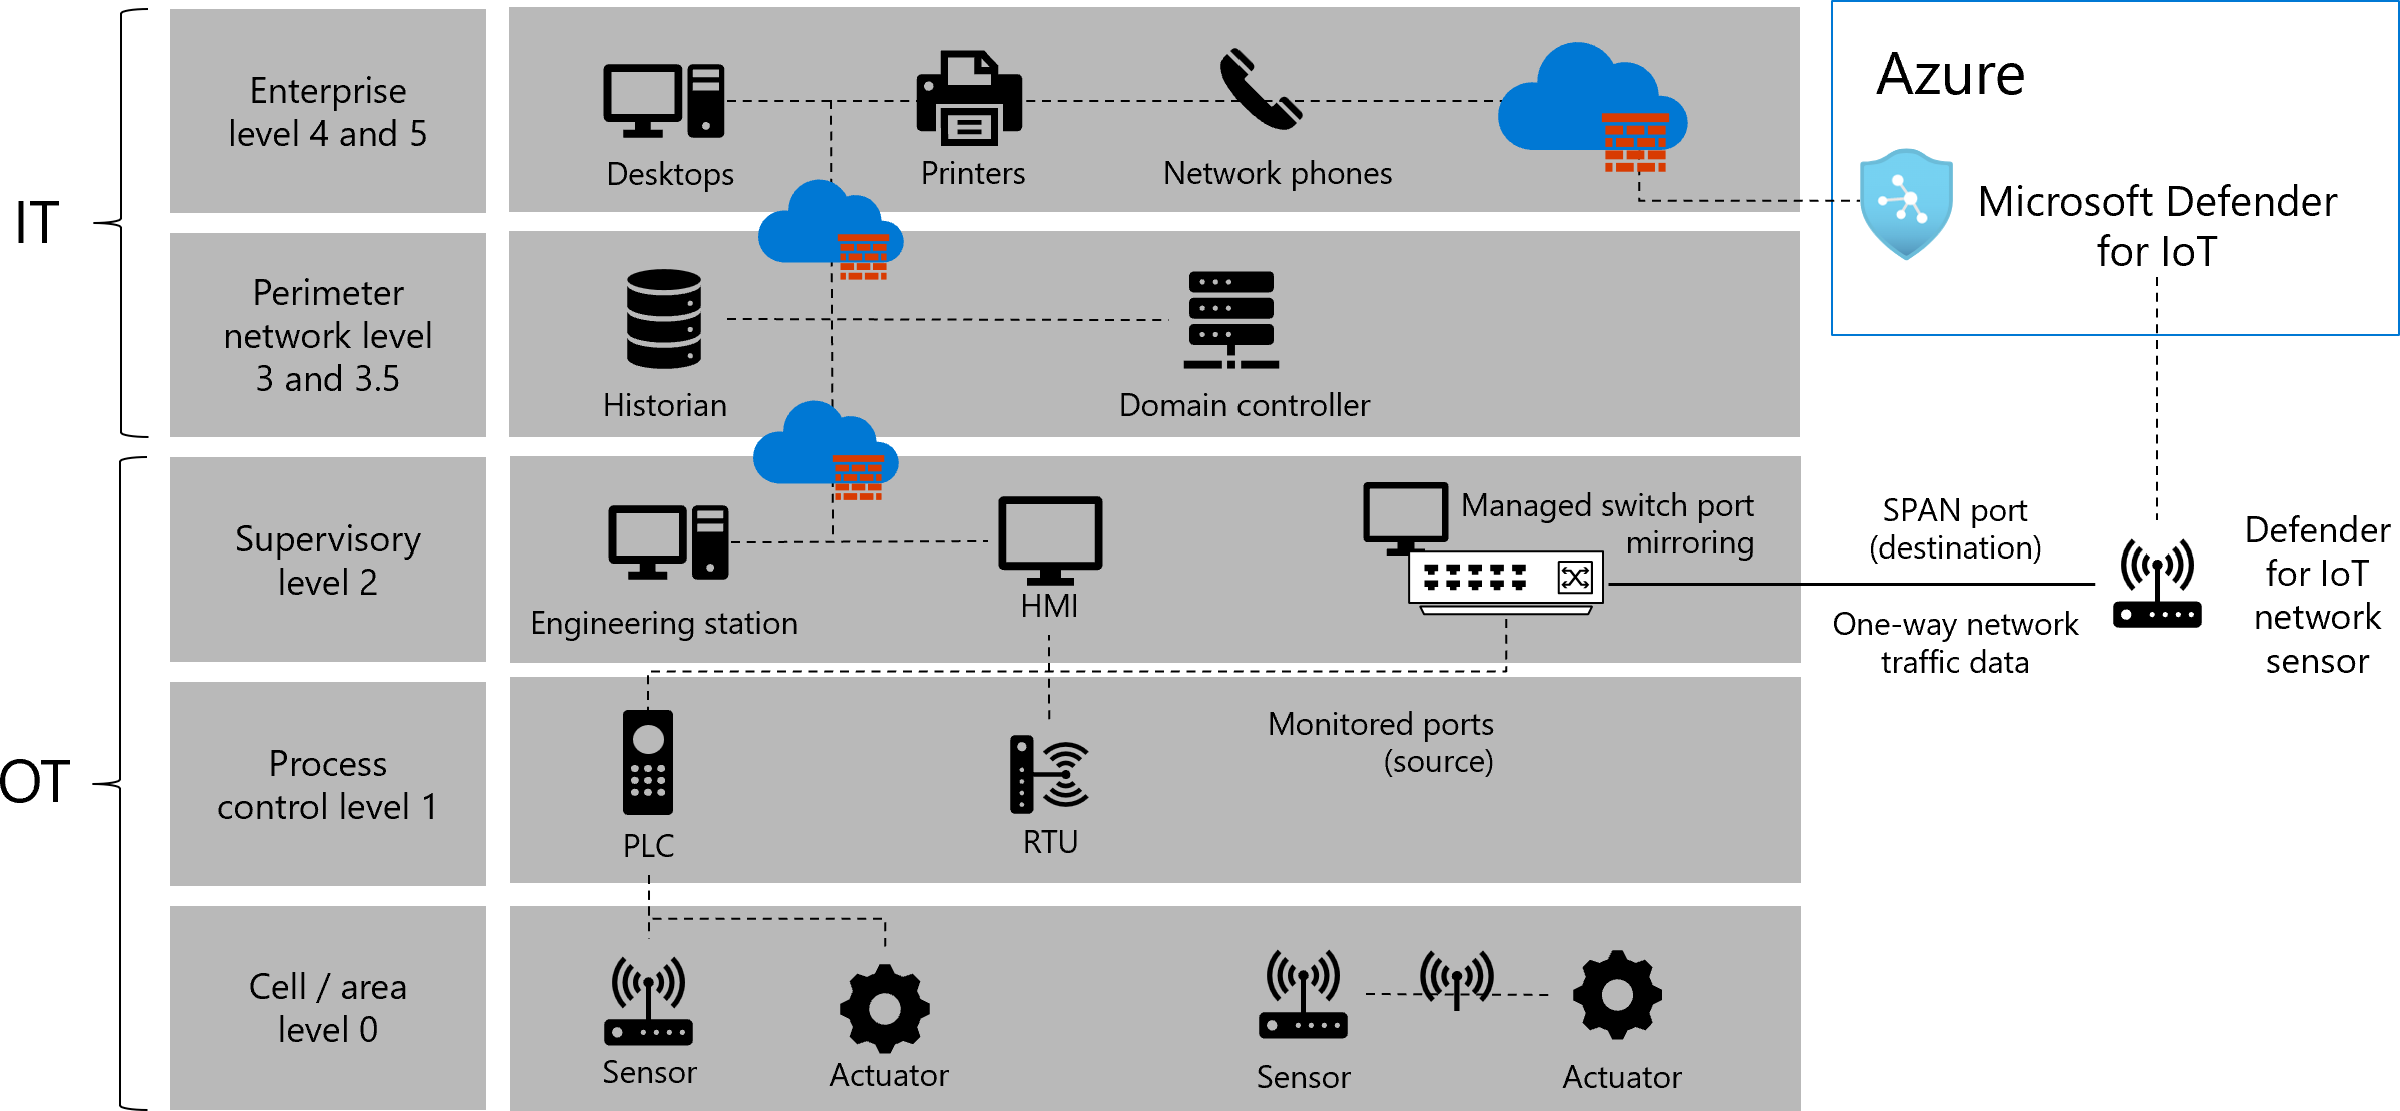 Diagram of the Purdue model with Defender for IoT components.